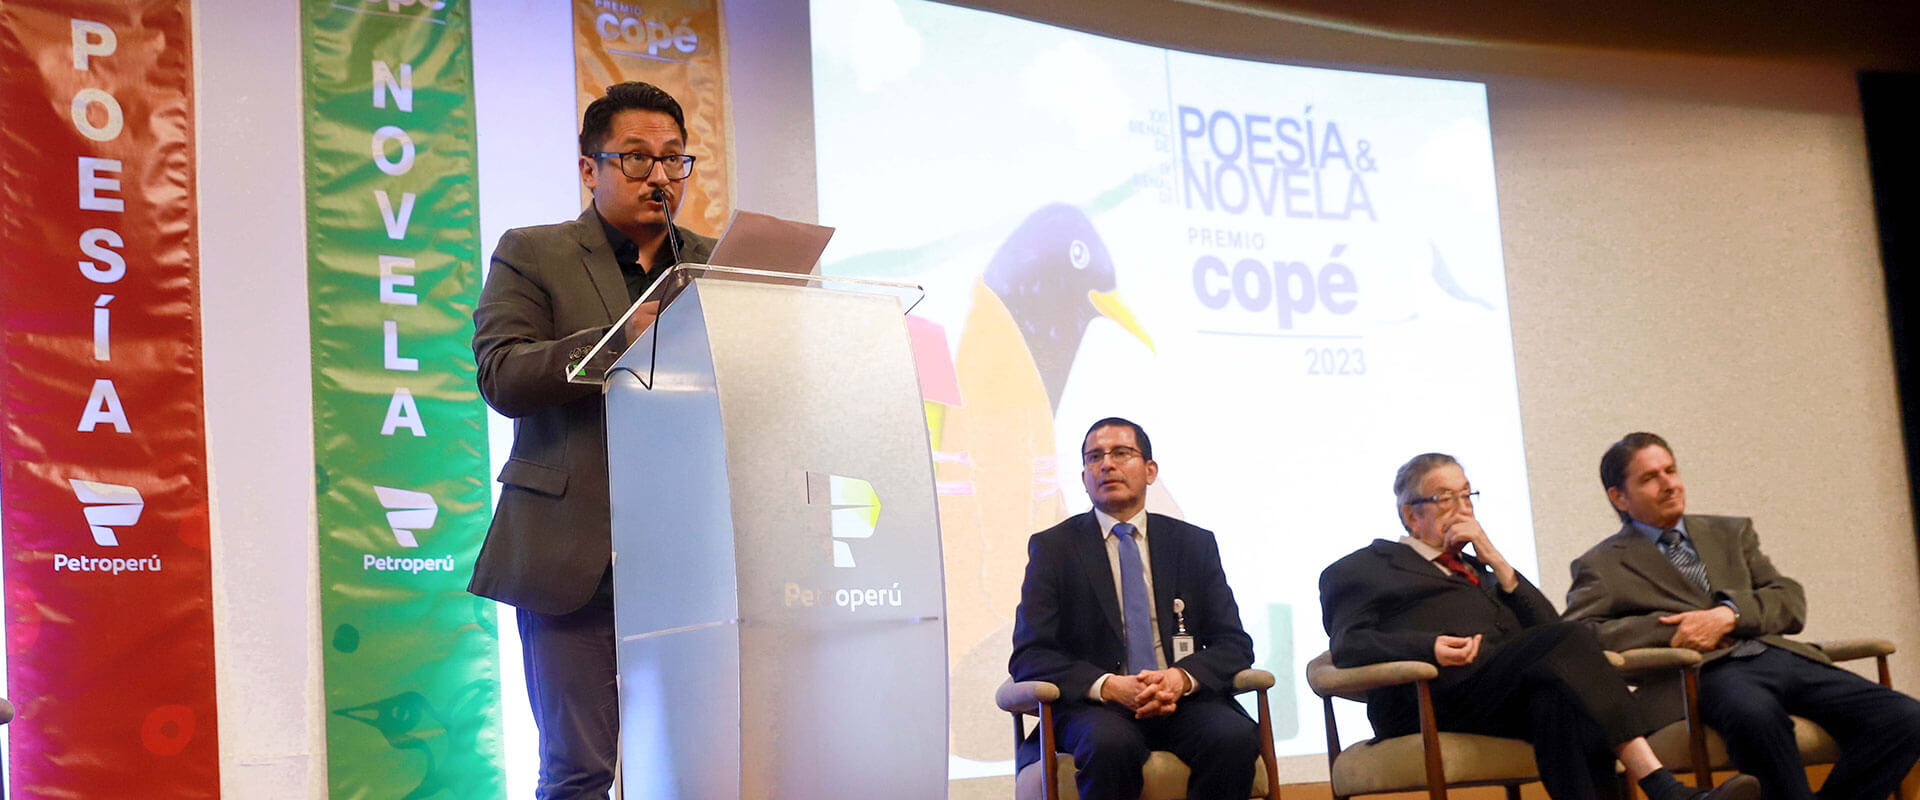 Christian Elguera Olórtegui, a novelist who teaches Spanish at St. Mary’s University, has won a top literary prize in his home country of Peru, the Copé Award.